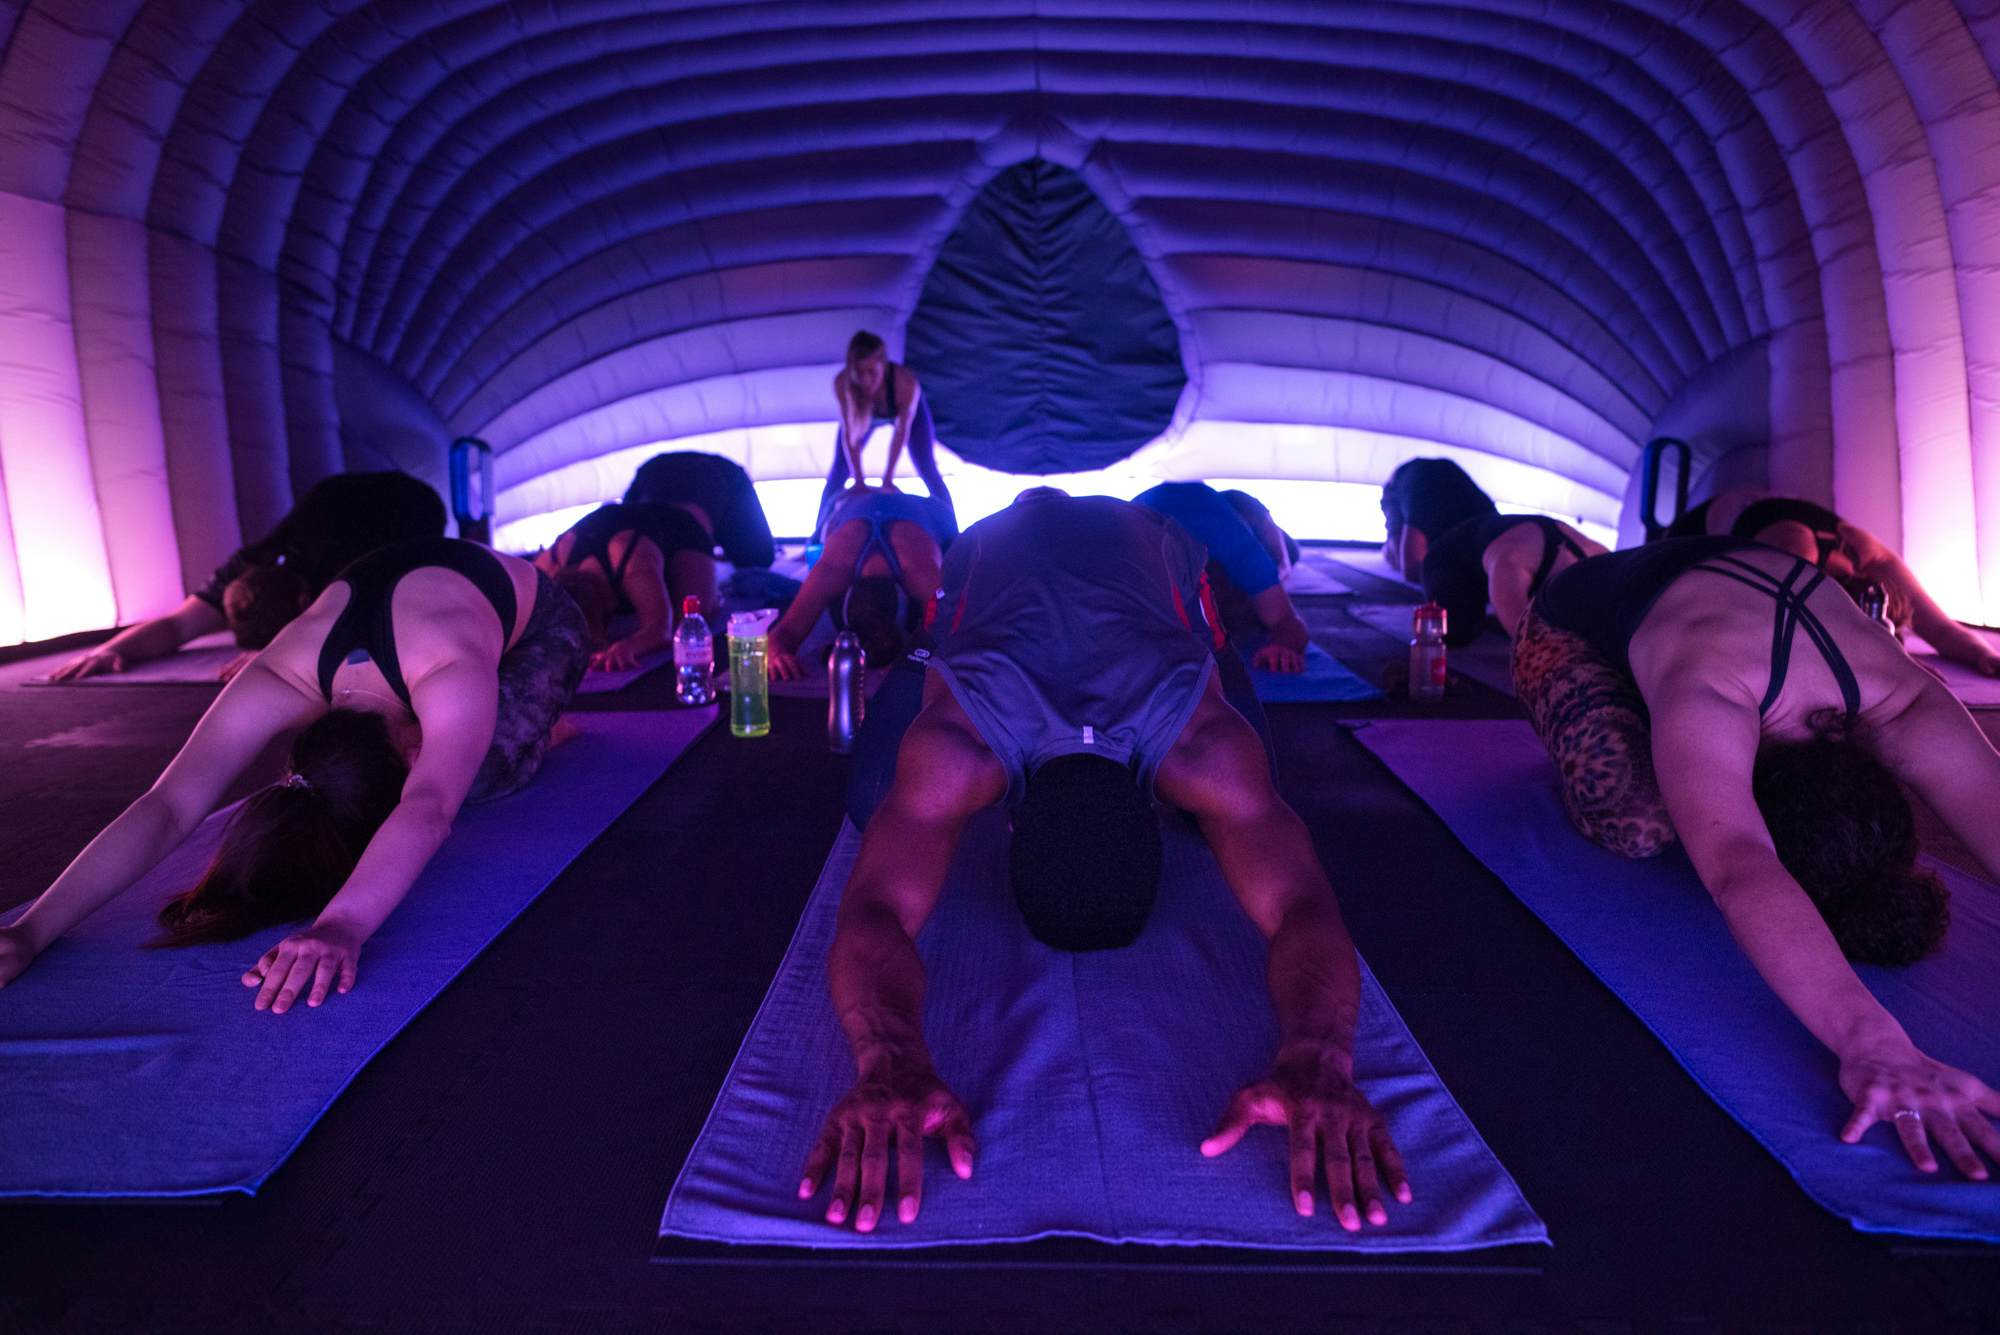 An Inside Look At The Newest Yoga Craze